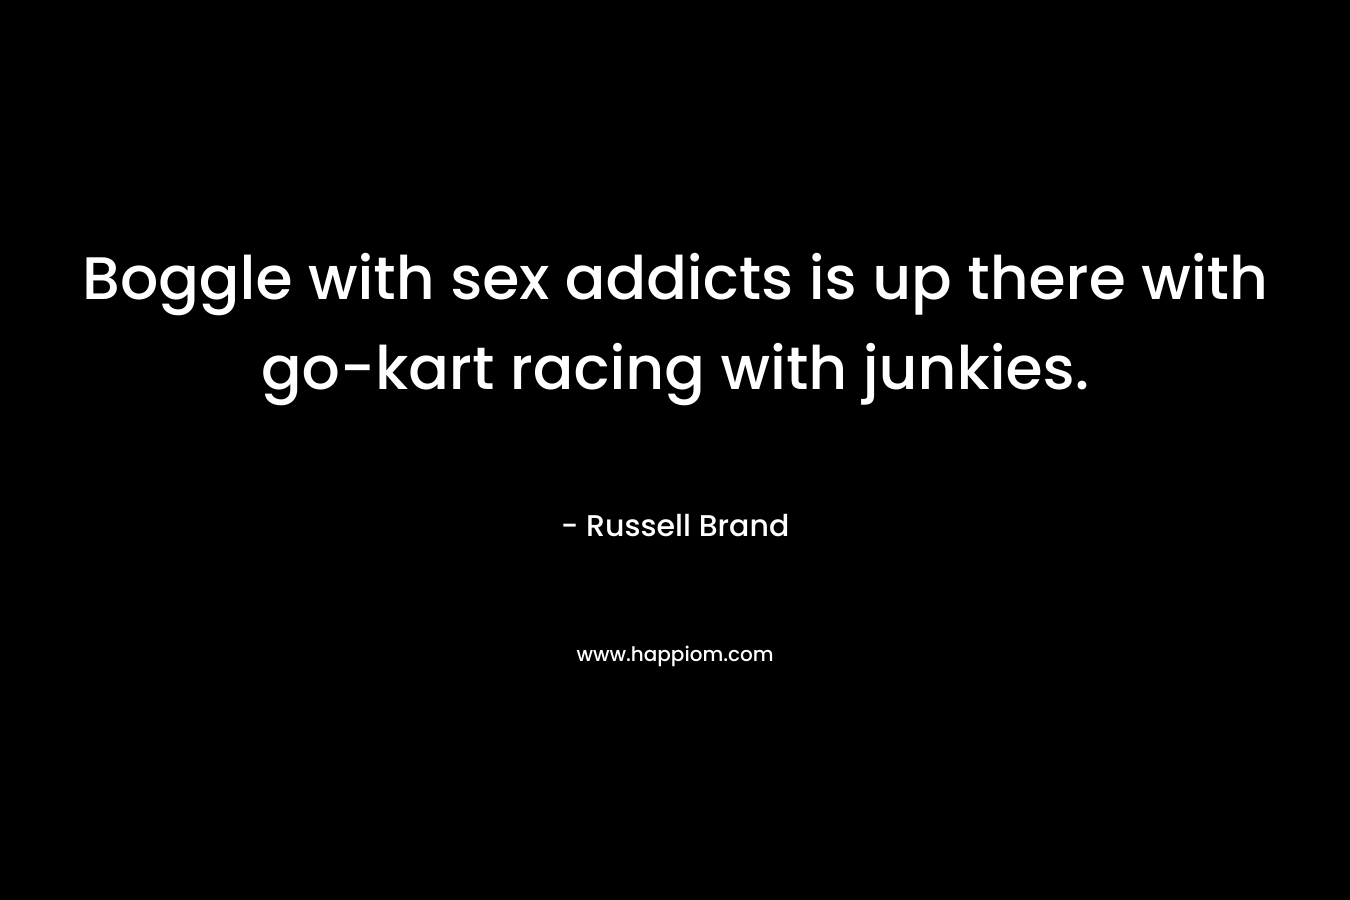 Boggle with sex addicts is up there with go-kart racing with junkies.